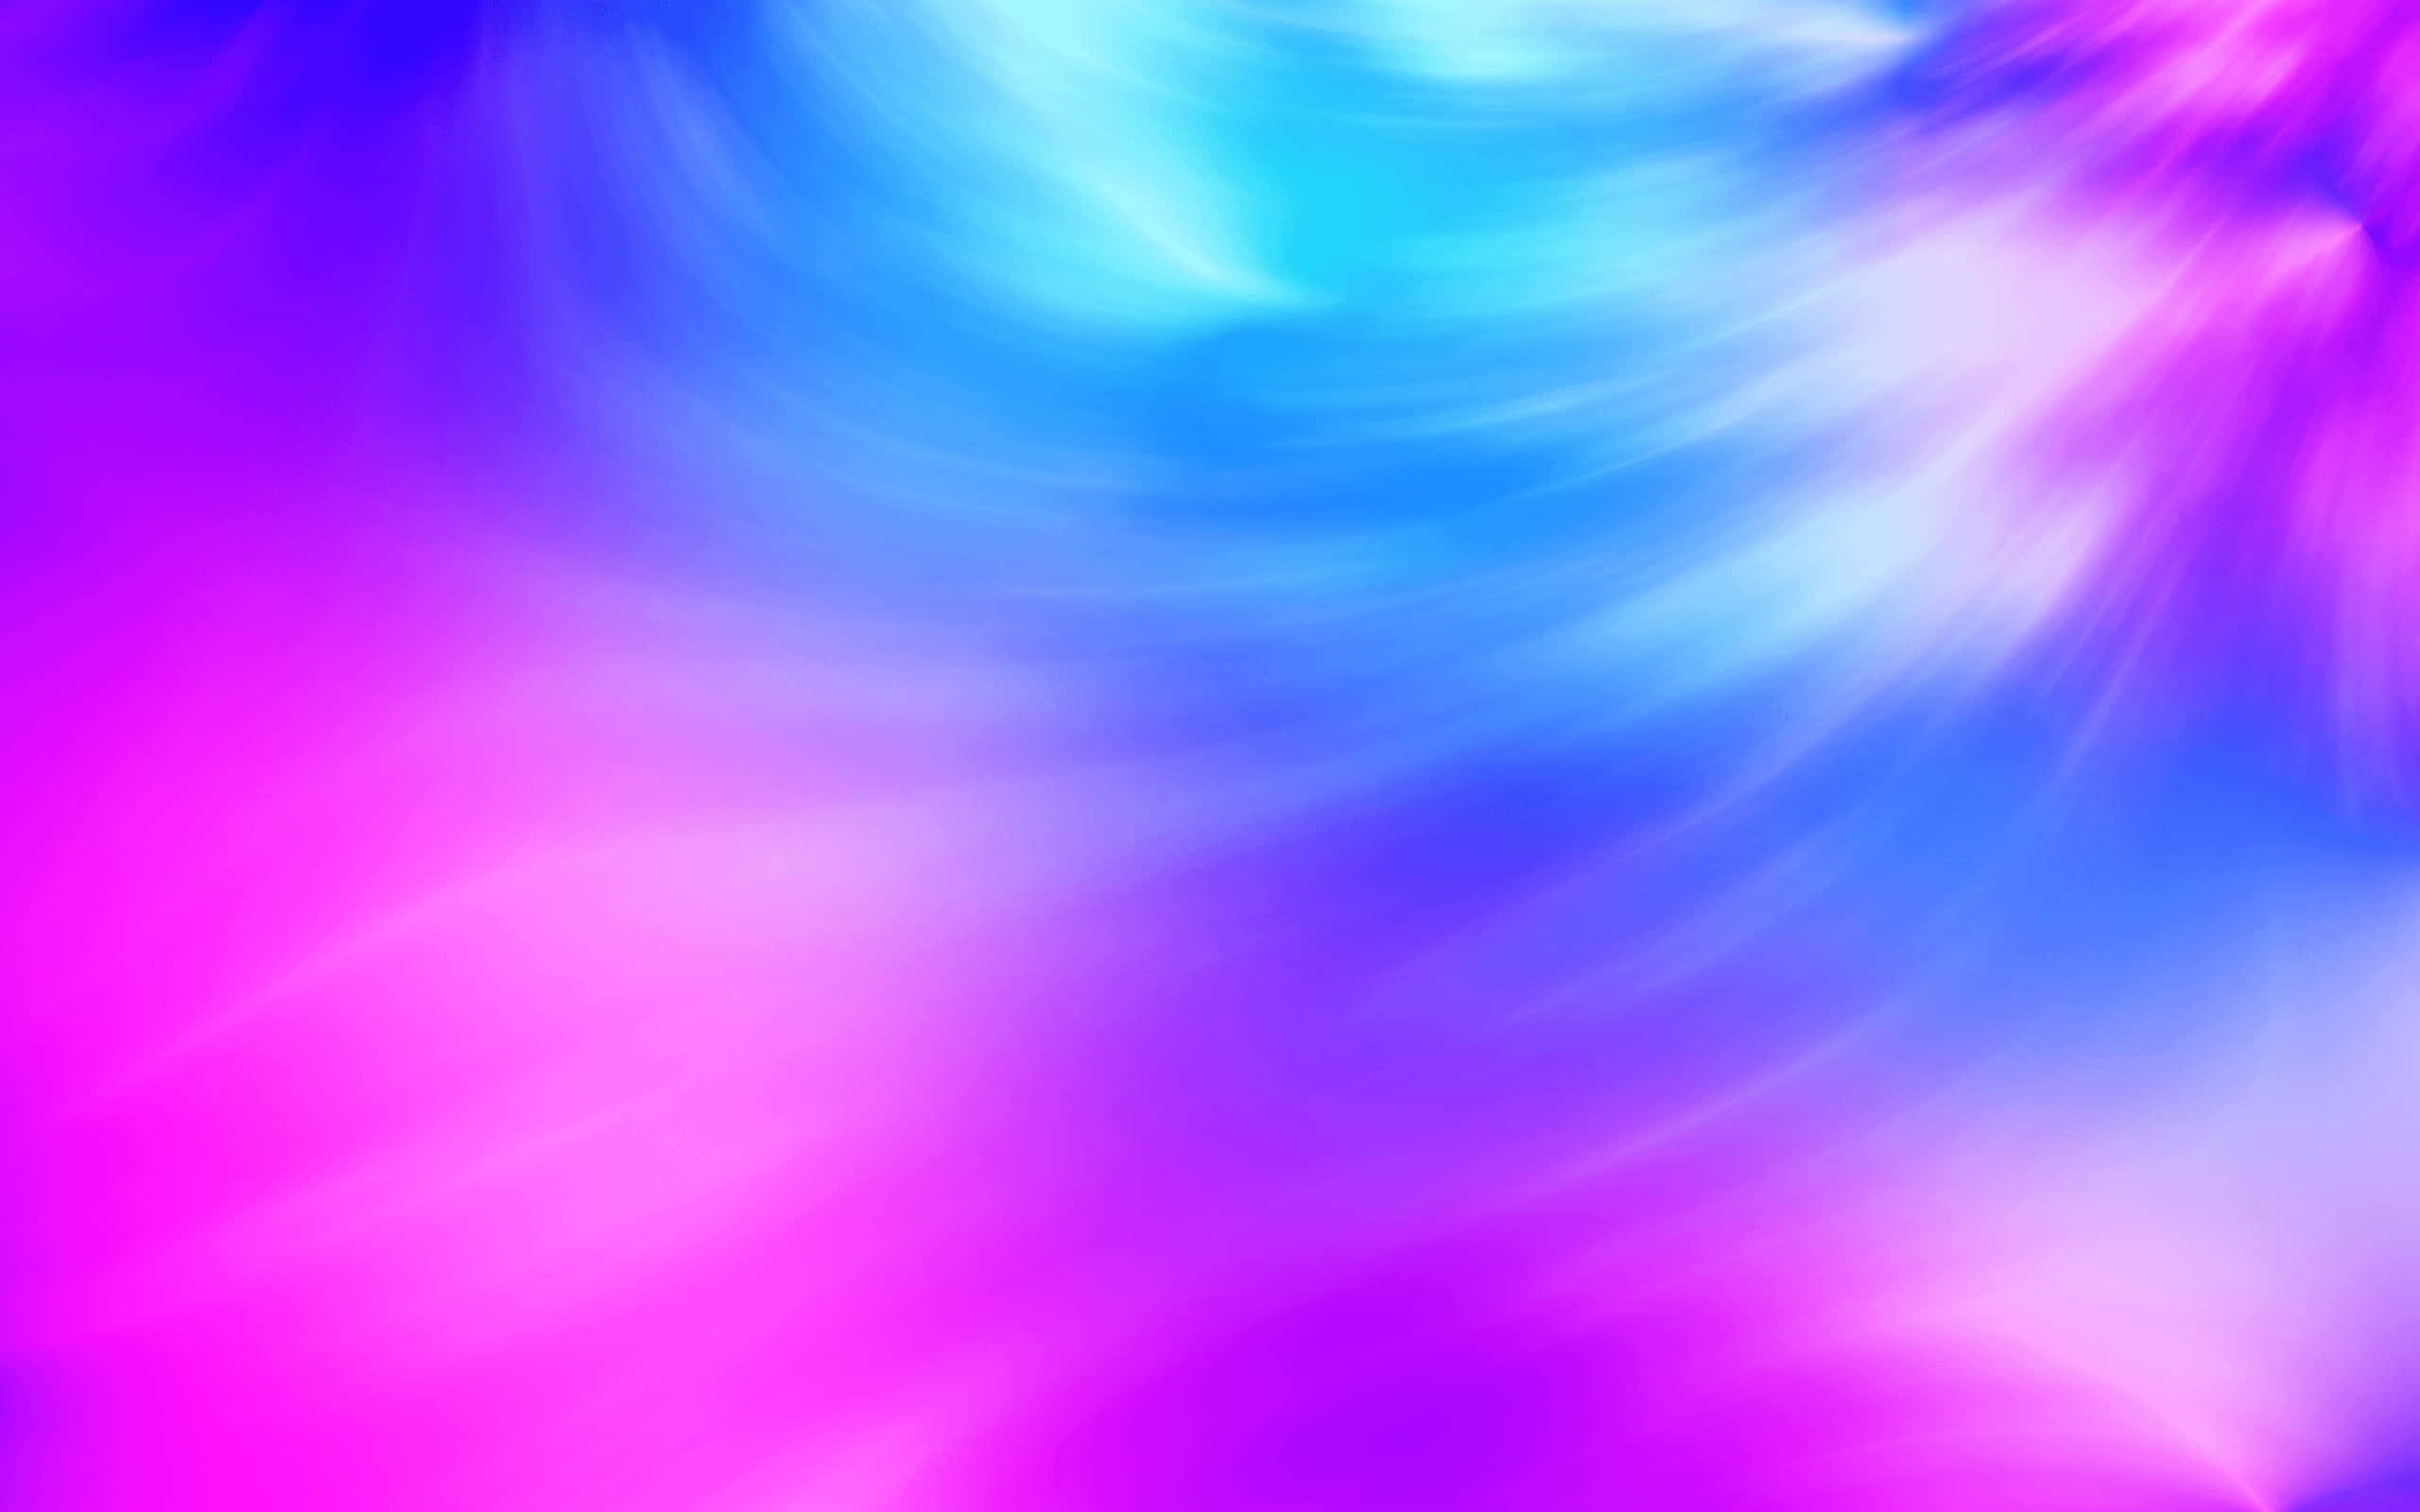 Aesthetic Pink and Blue Gradient Background